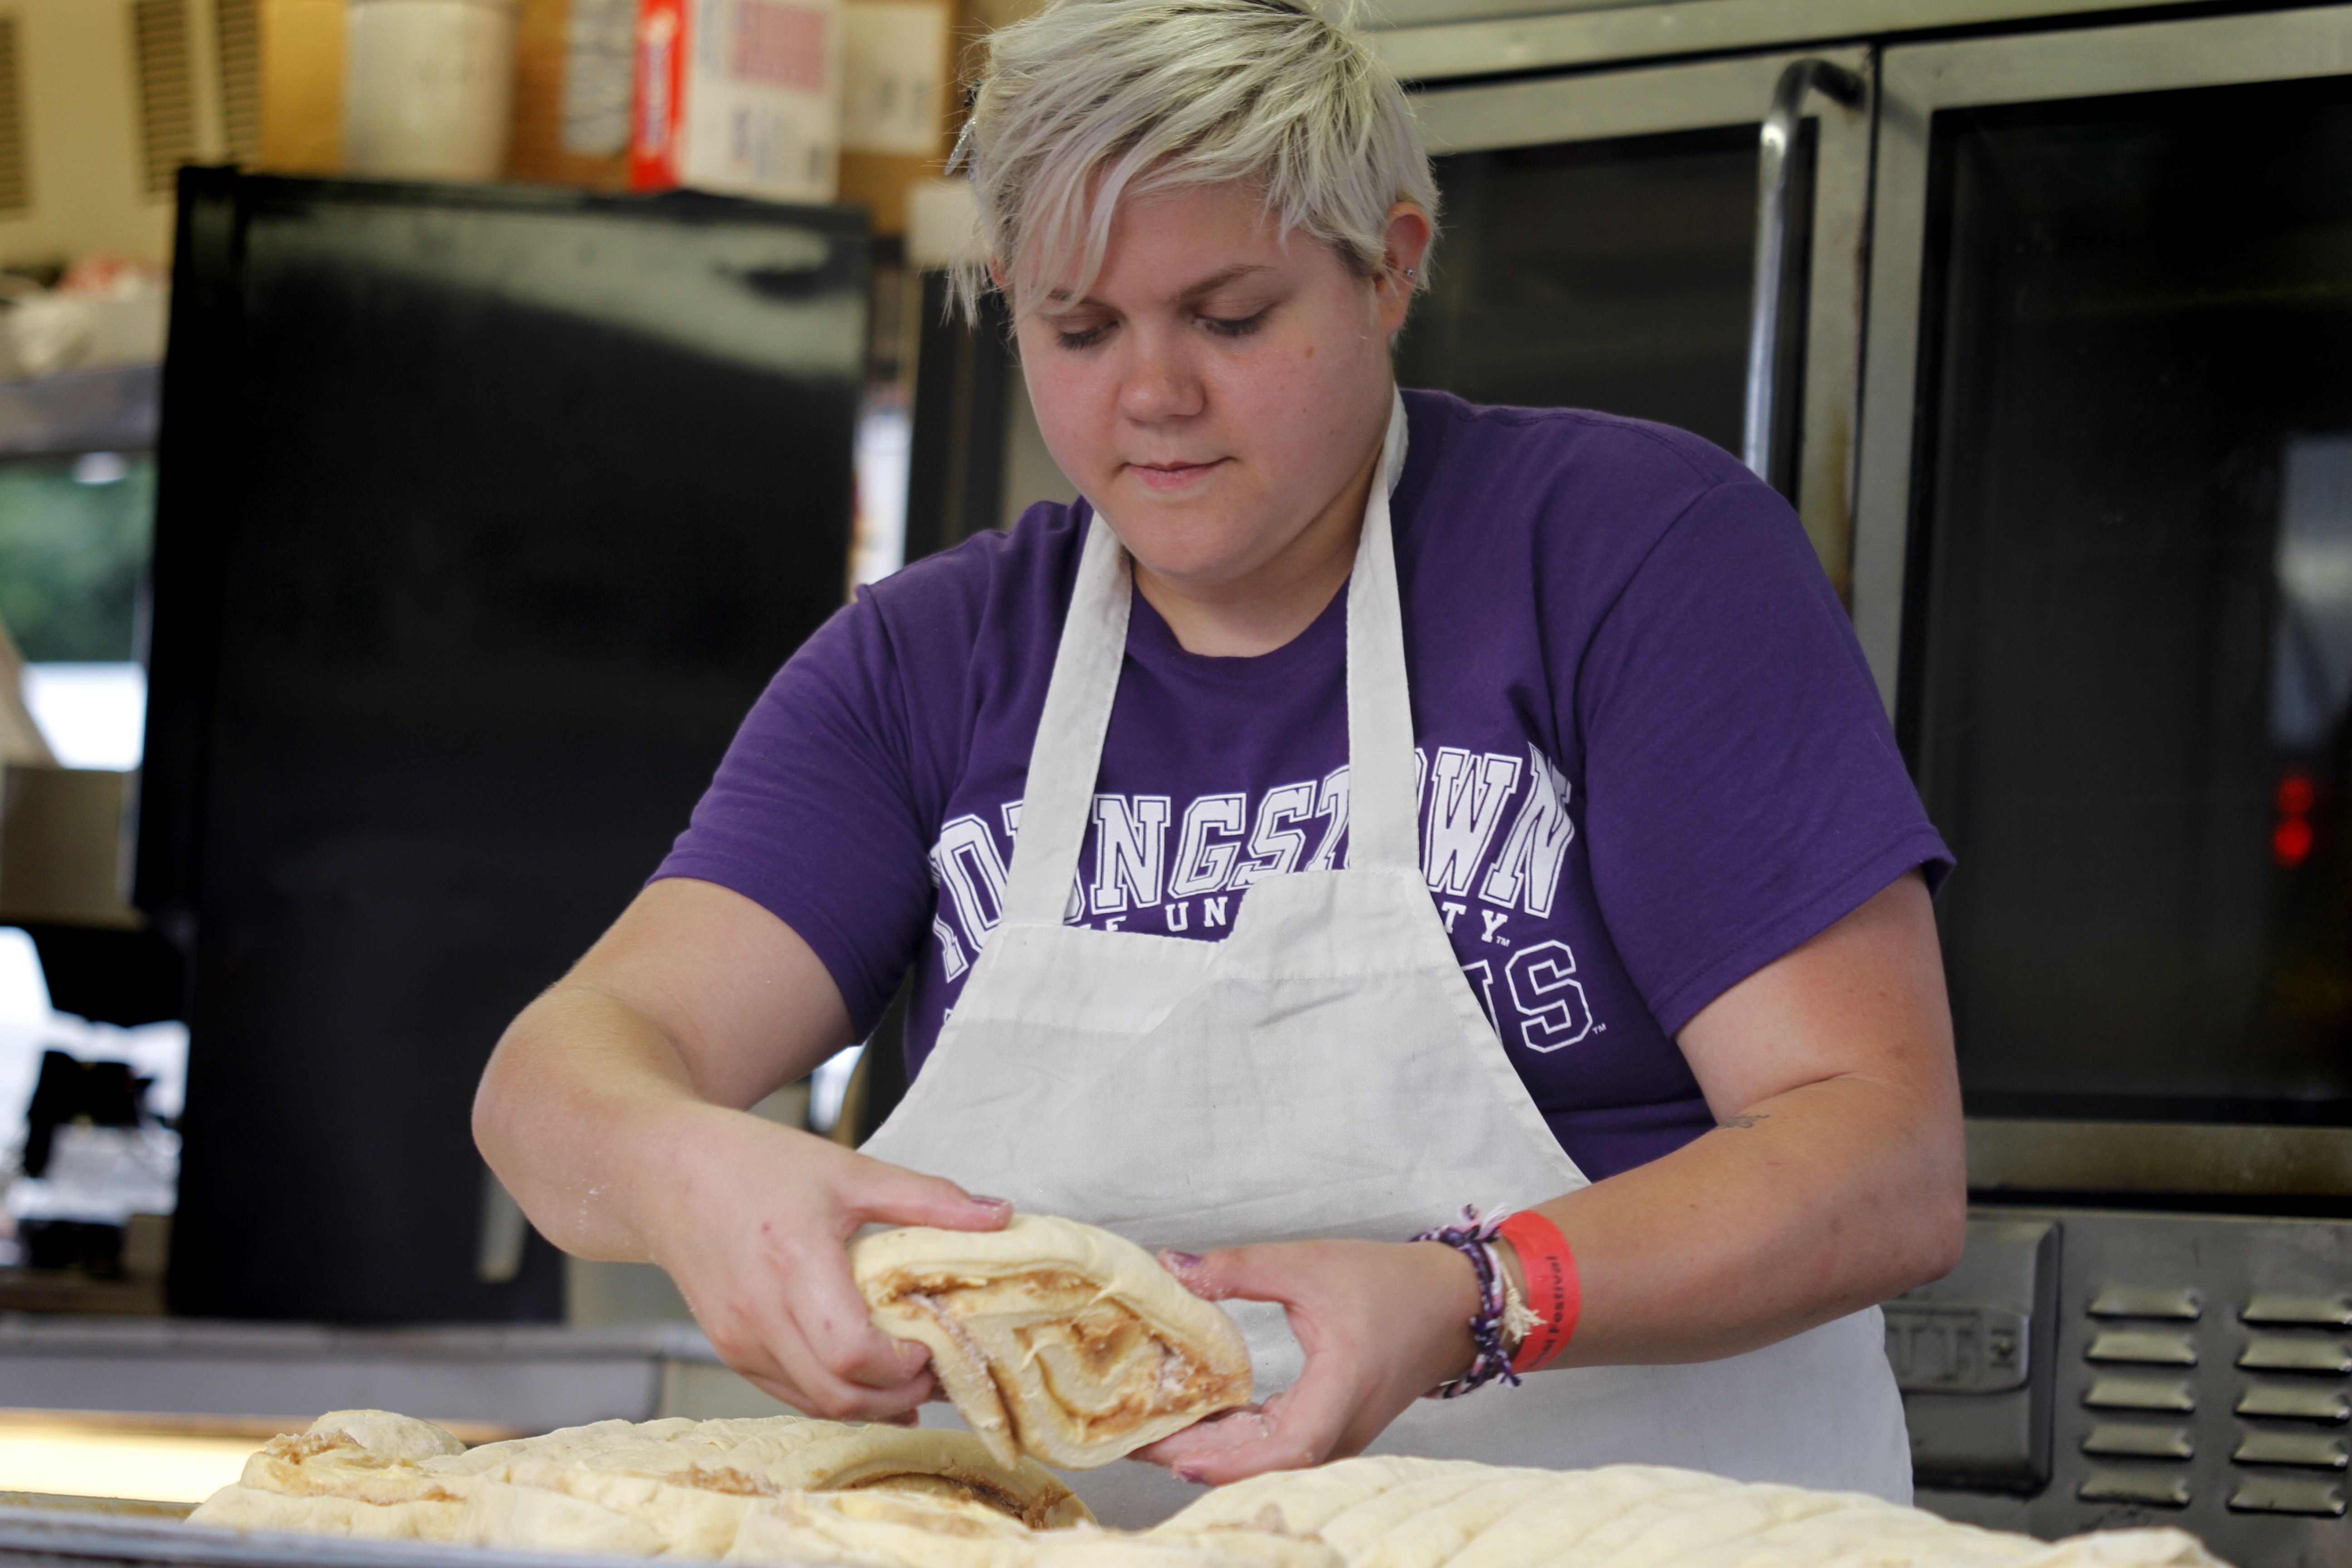 MADELYN P. HASTINGS | THE VINDICATOR

Krista Ulbricht of Youngstown makes cinnamon rolls for the Rimedio's Bakery stand at the 15th annual Our Lady of Mount Carmel Italian Festival on Saturday, July 27.